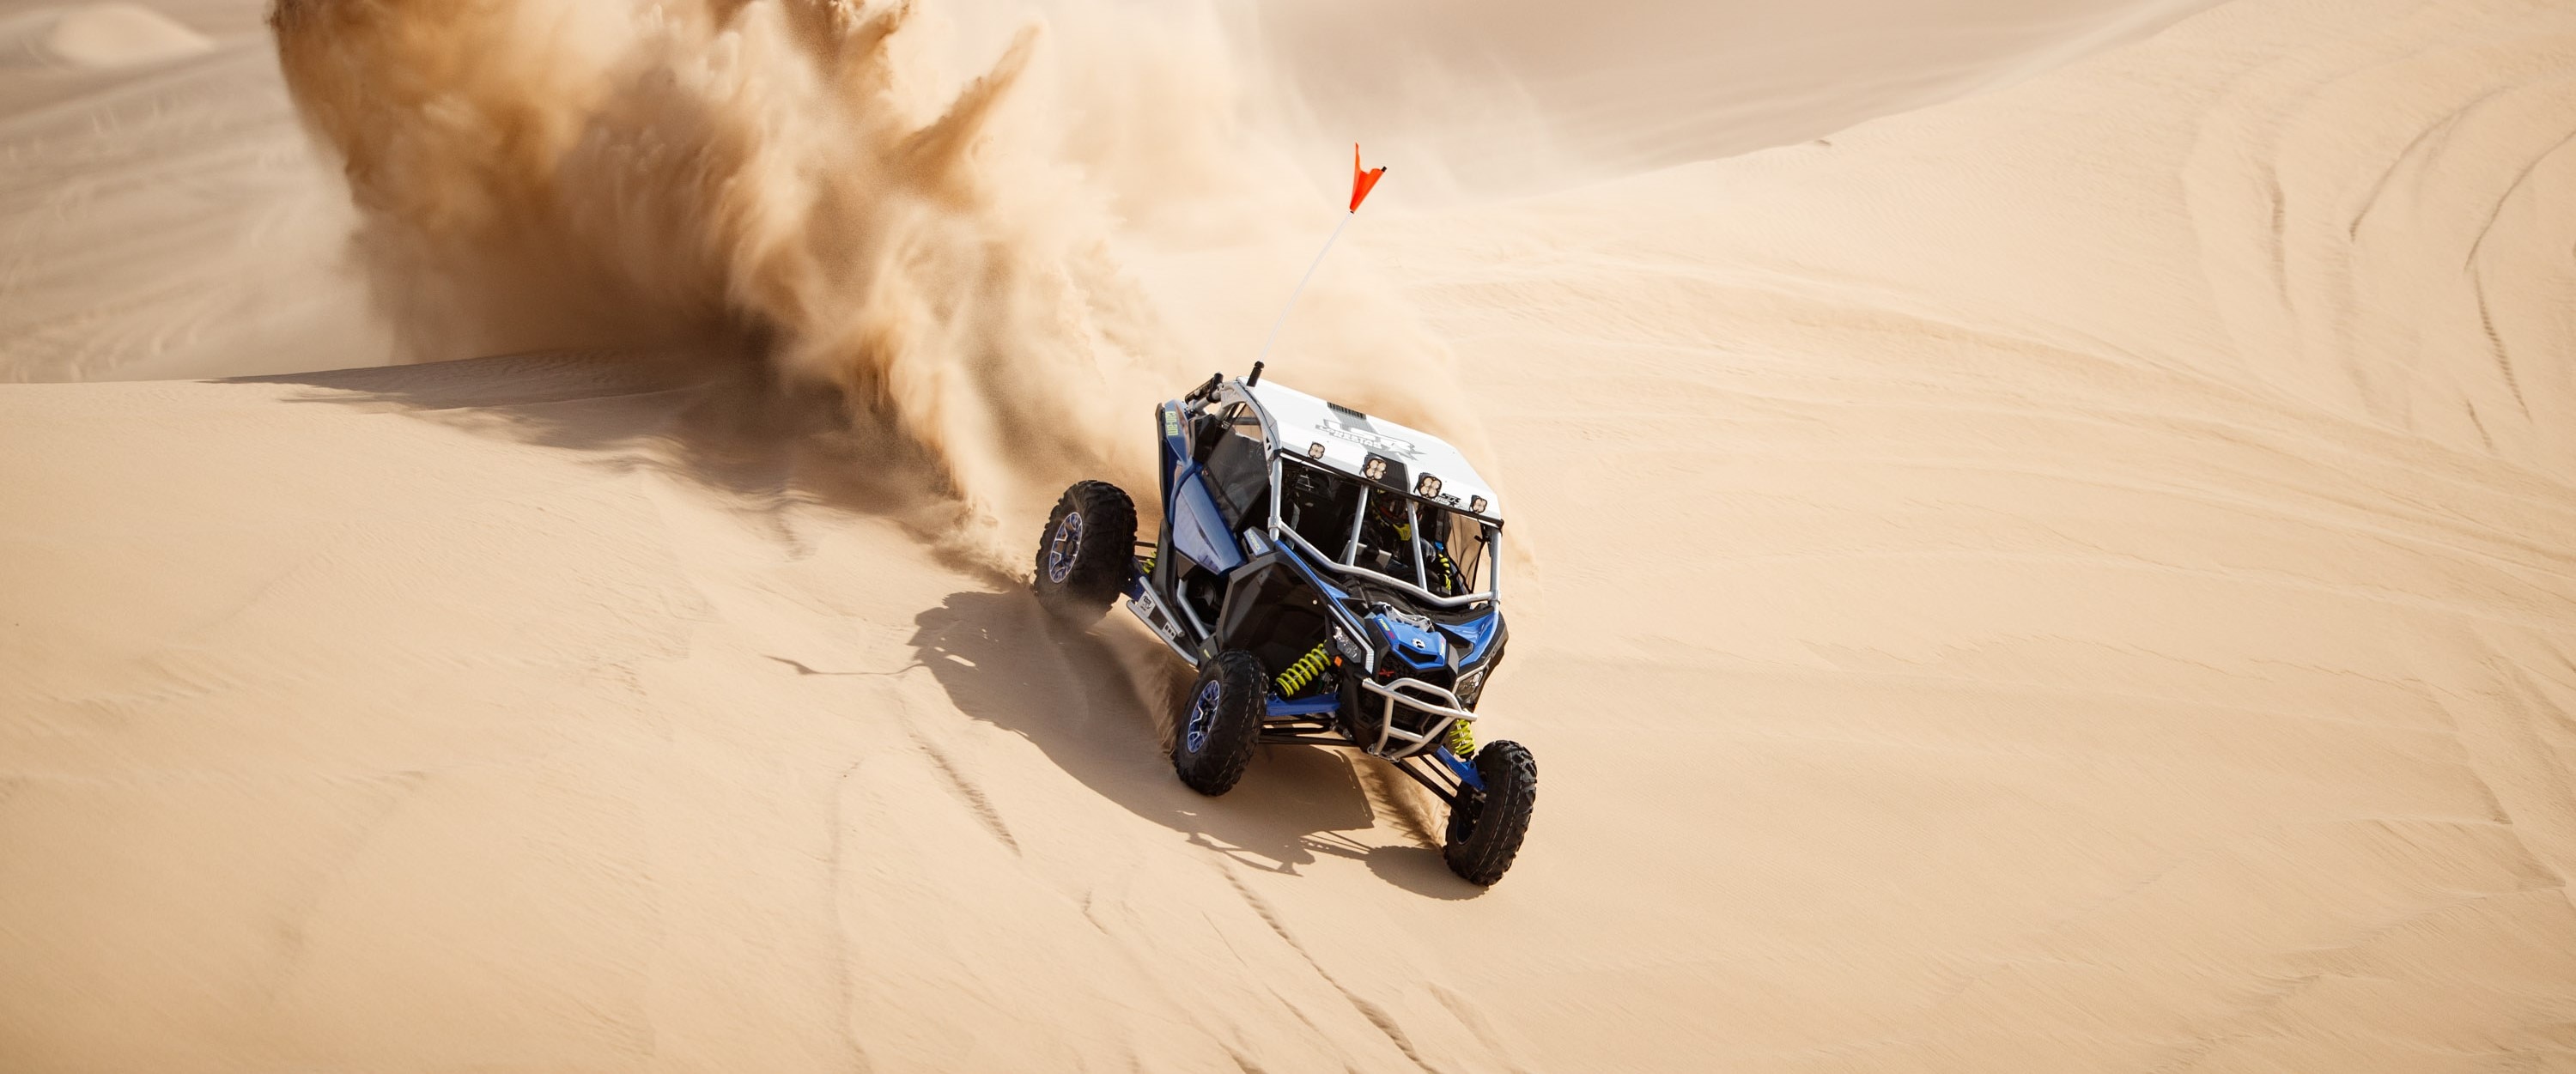 Maverick X3 RS TURBO RR racing through dunes, throwing up sand in its trail. 